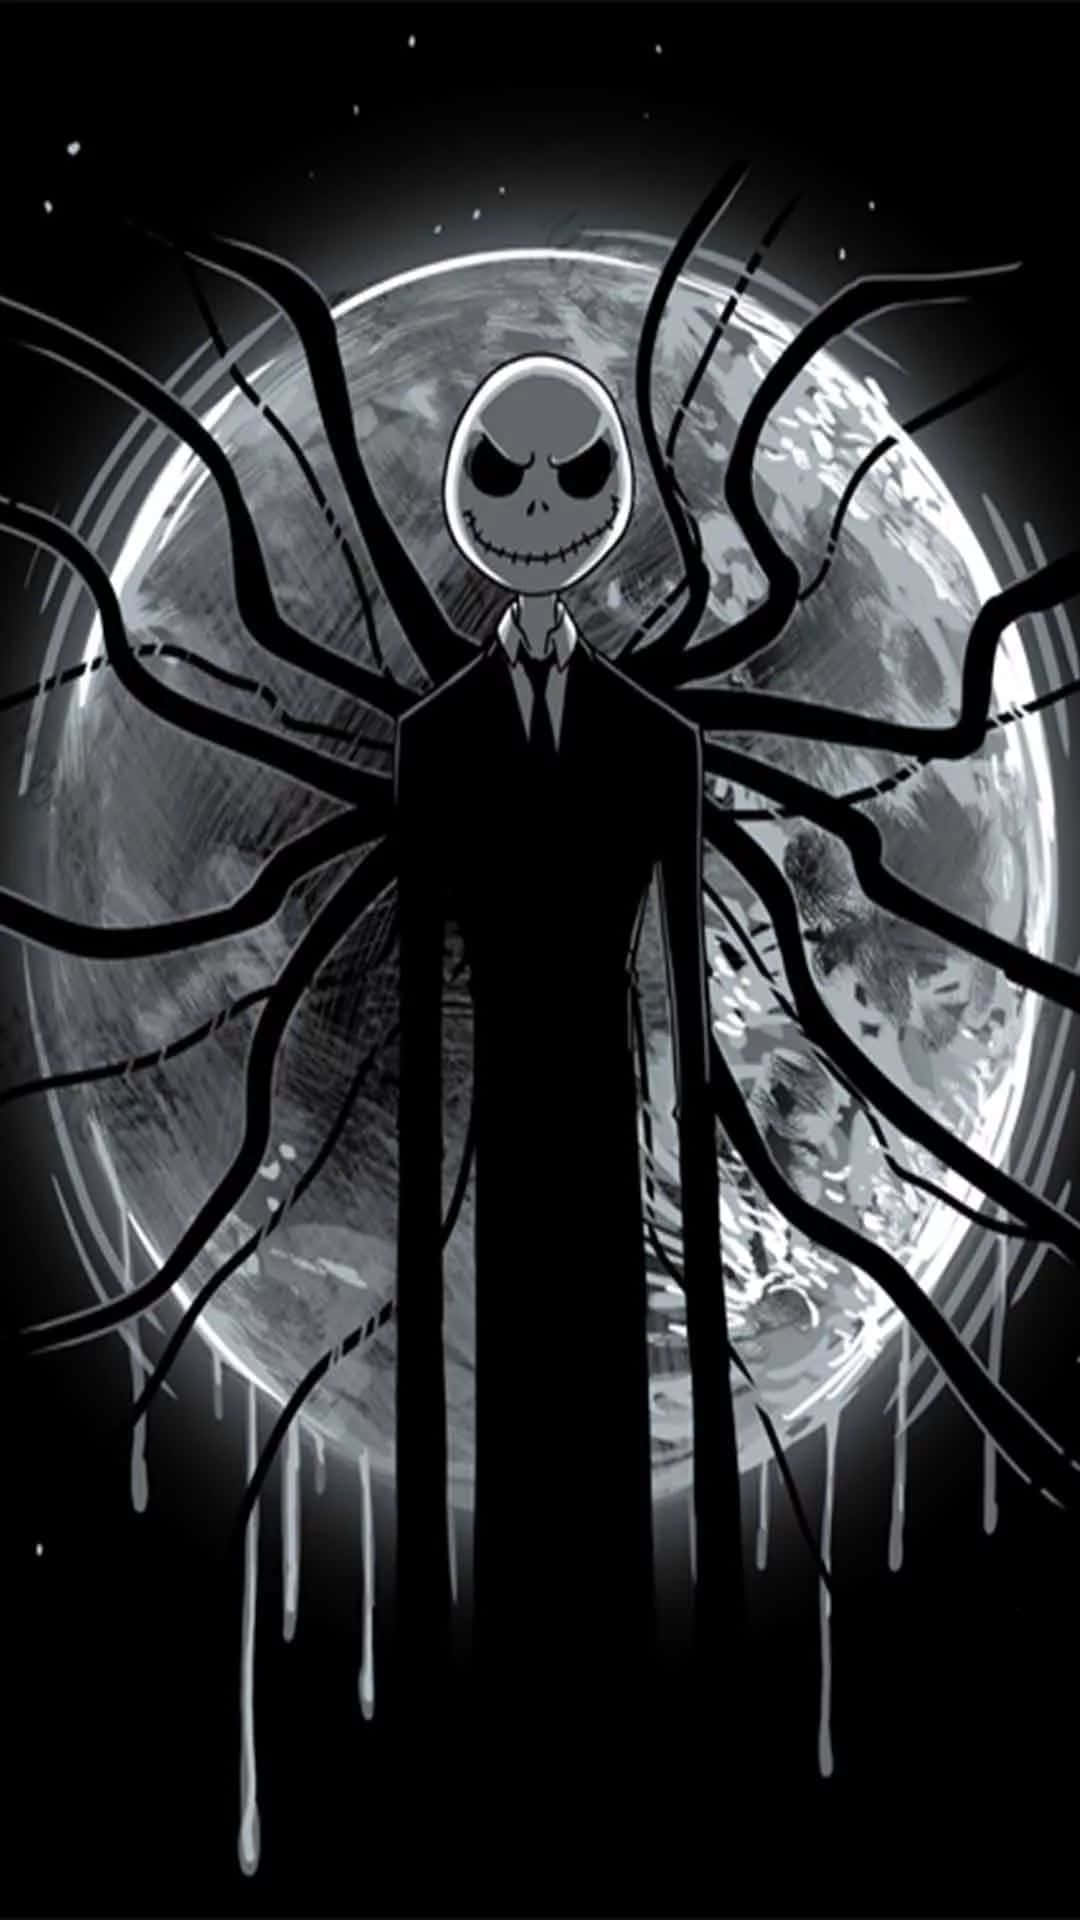 Feel eerie and spooky with the Nightmare Before Christmas Phone! Wallpaper